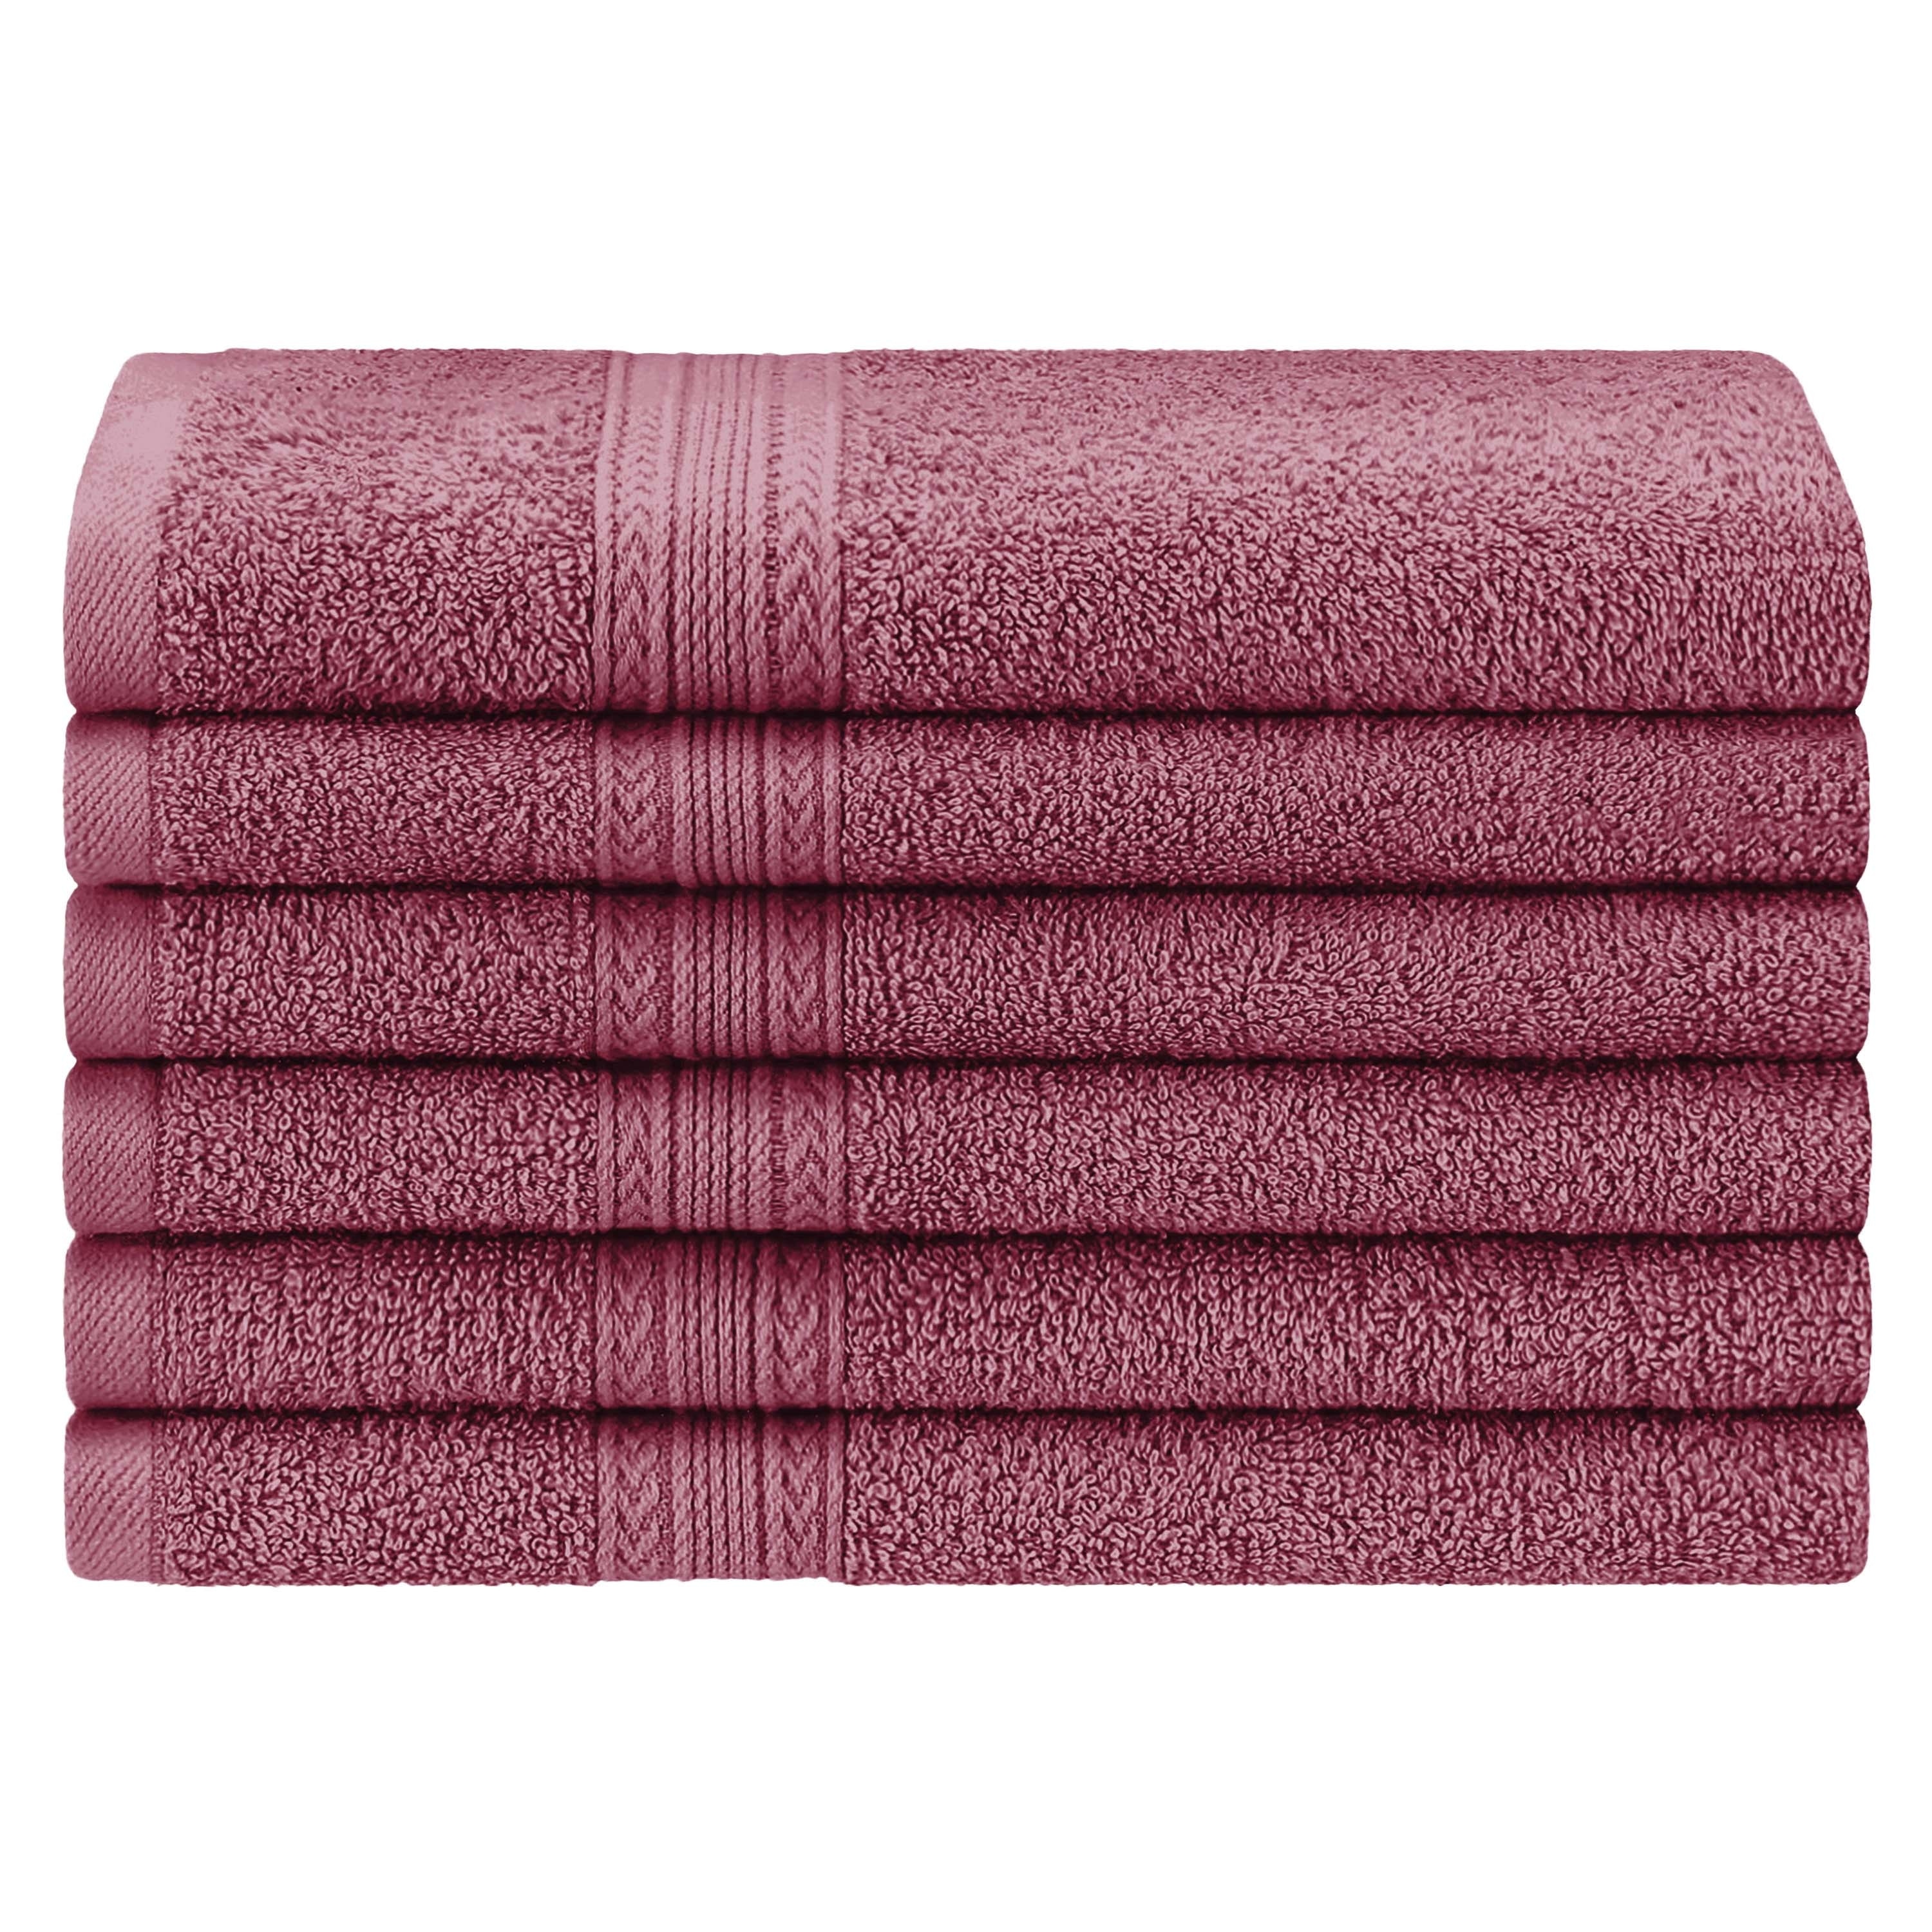 Superior Eco Friendly Cotton Soft and Absorbent Hand Towel - Set of 6 -  Overstock - 11165120